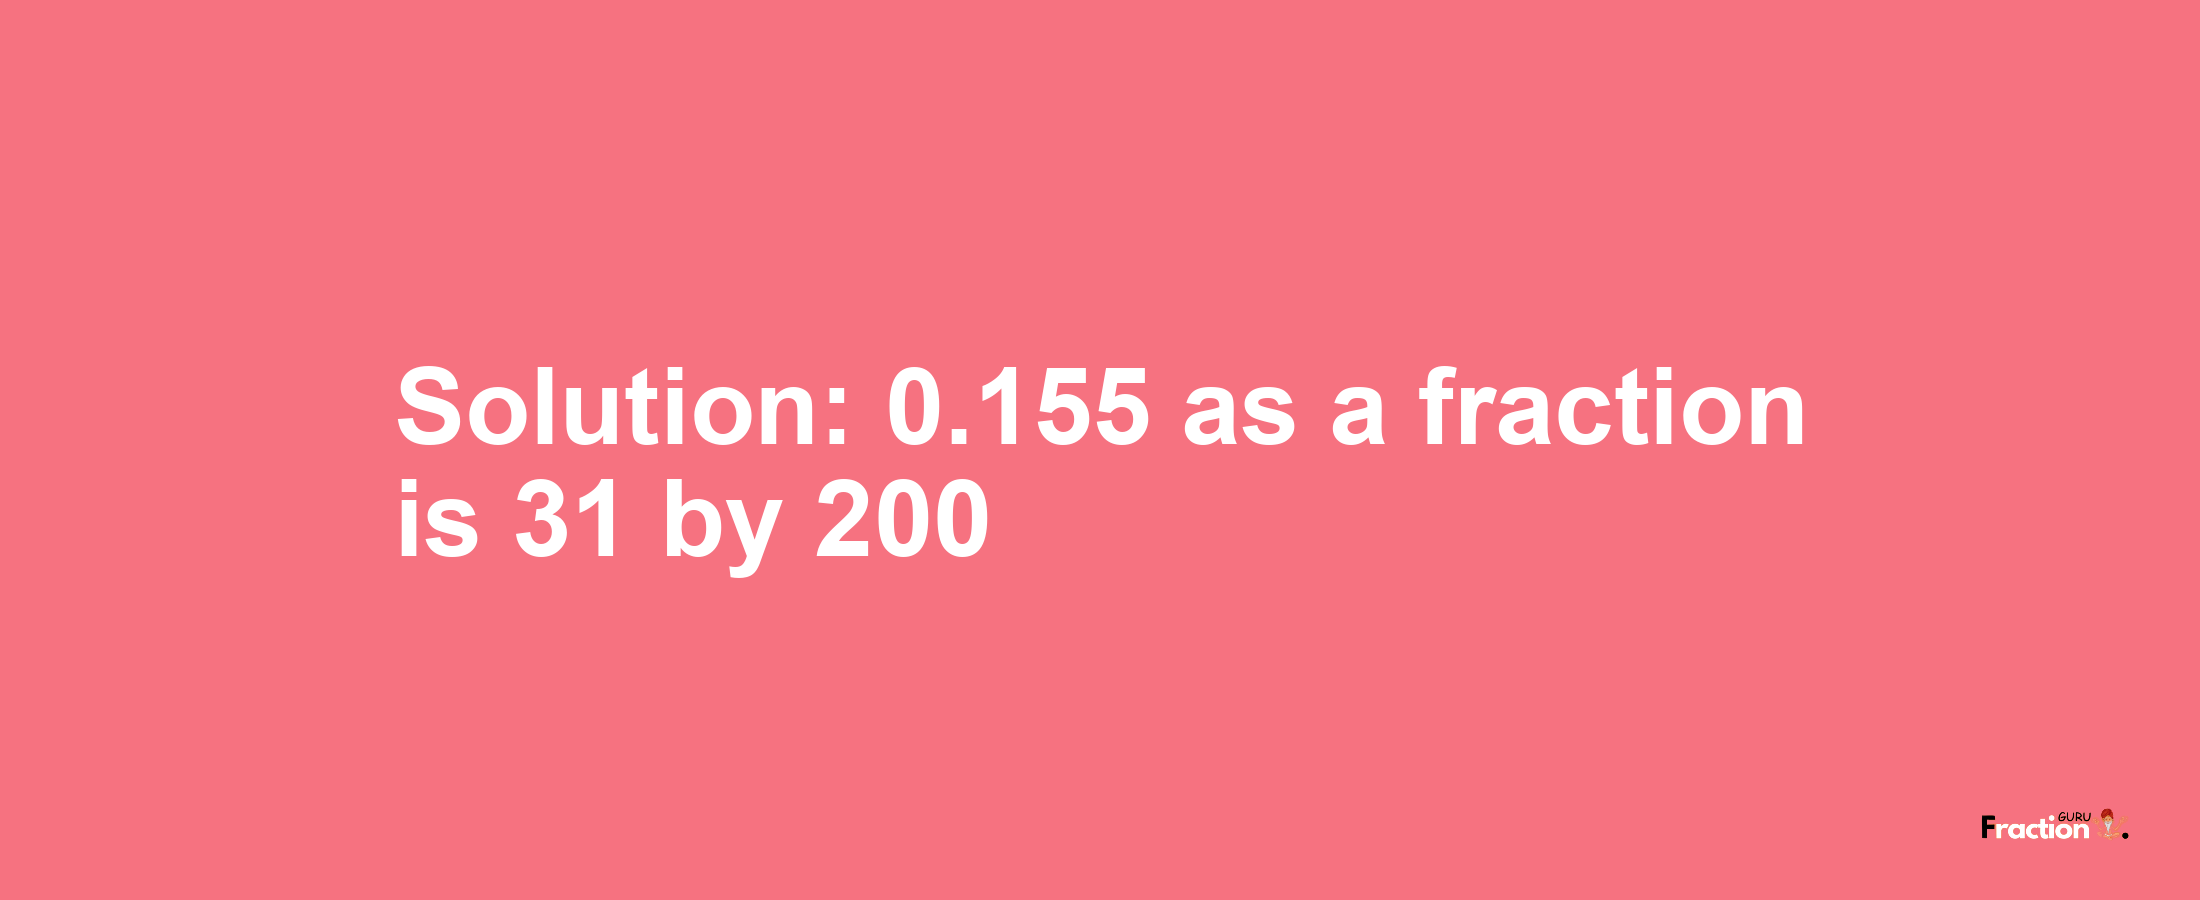 Solution:0.155 as a fraction is 31/200